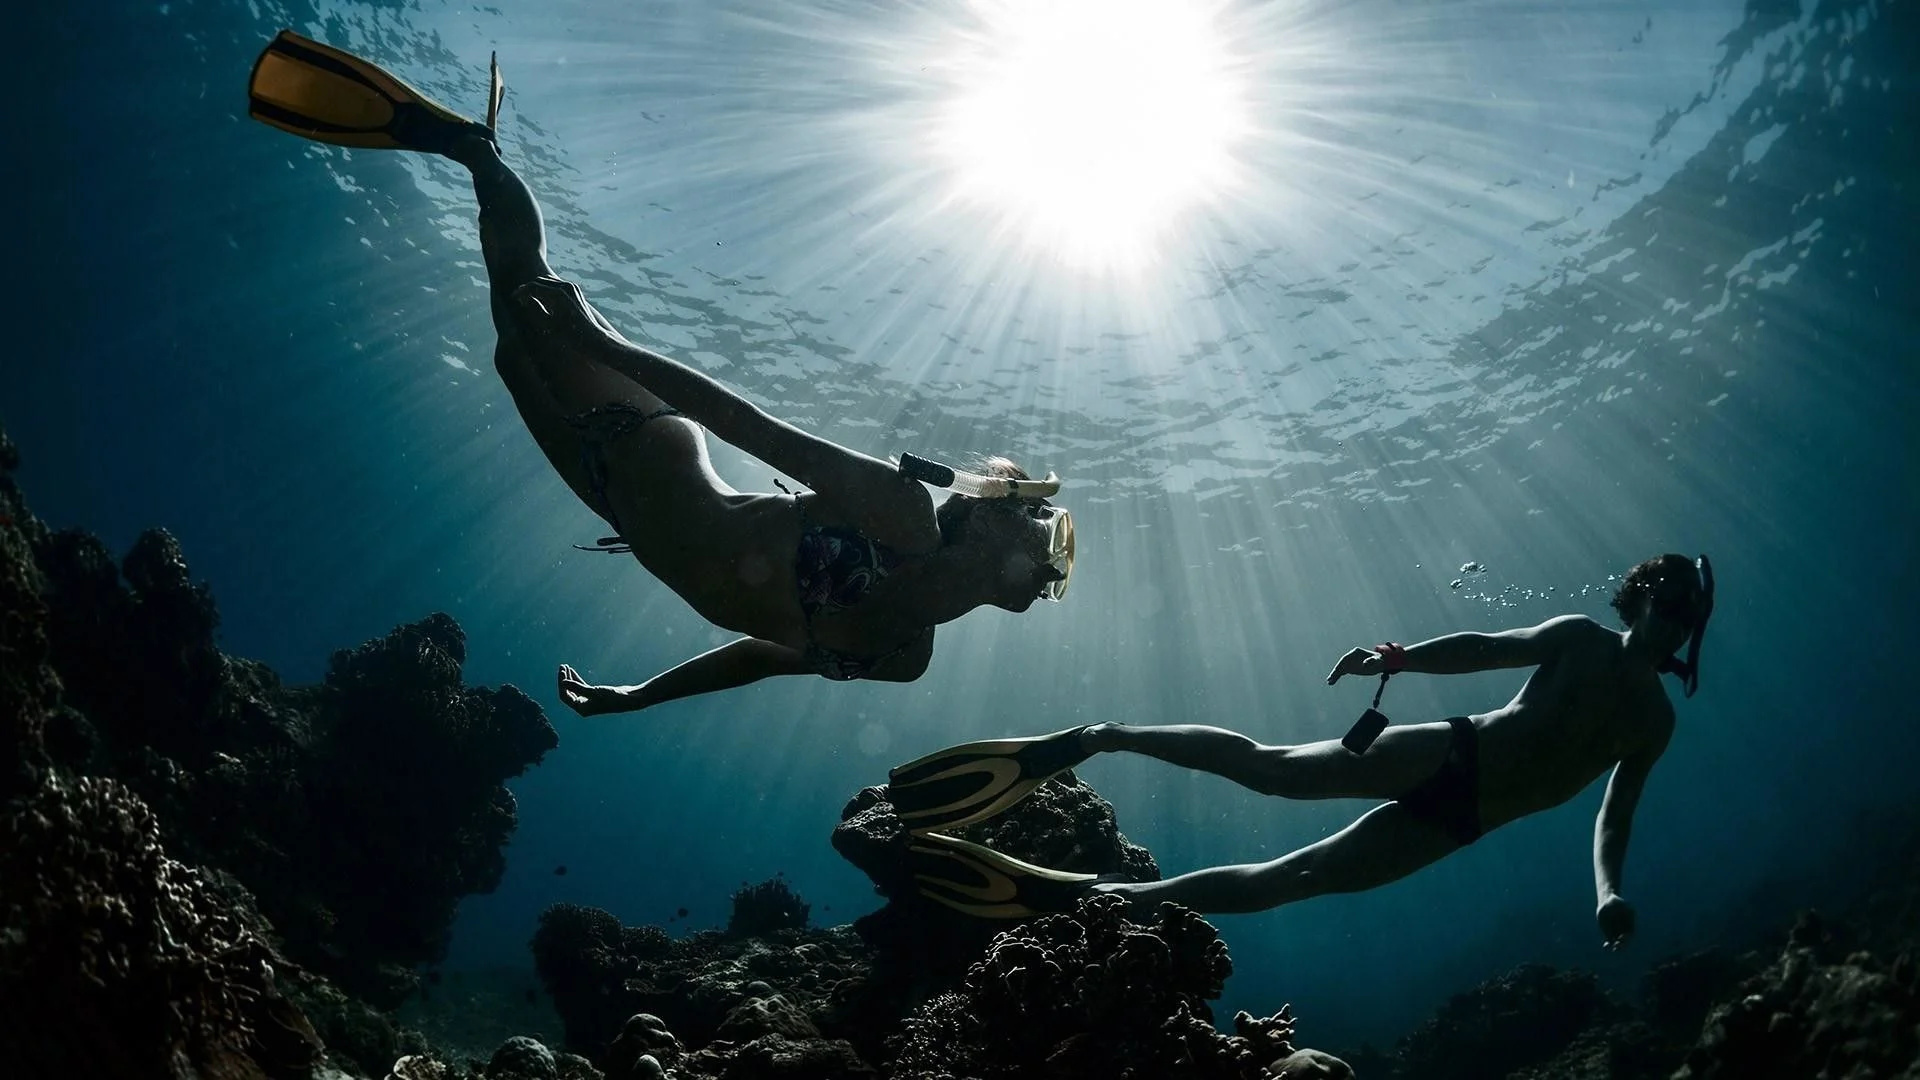 Diving: An underwater recreational activity, Extreme water sports discipline. 1920x1080 Full HD Wallpaper.